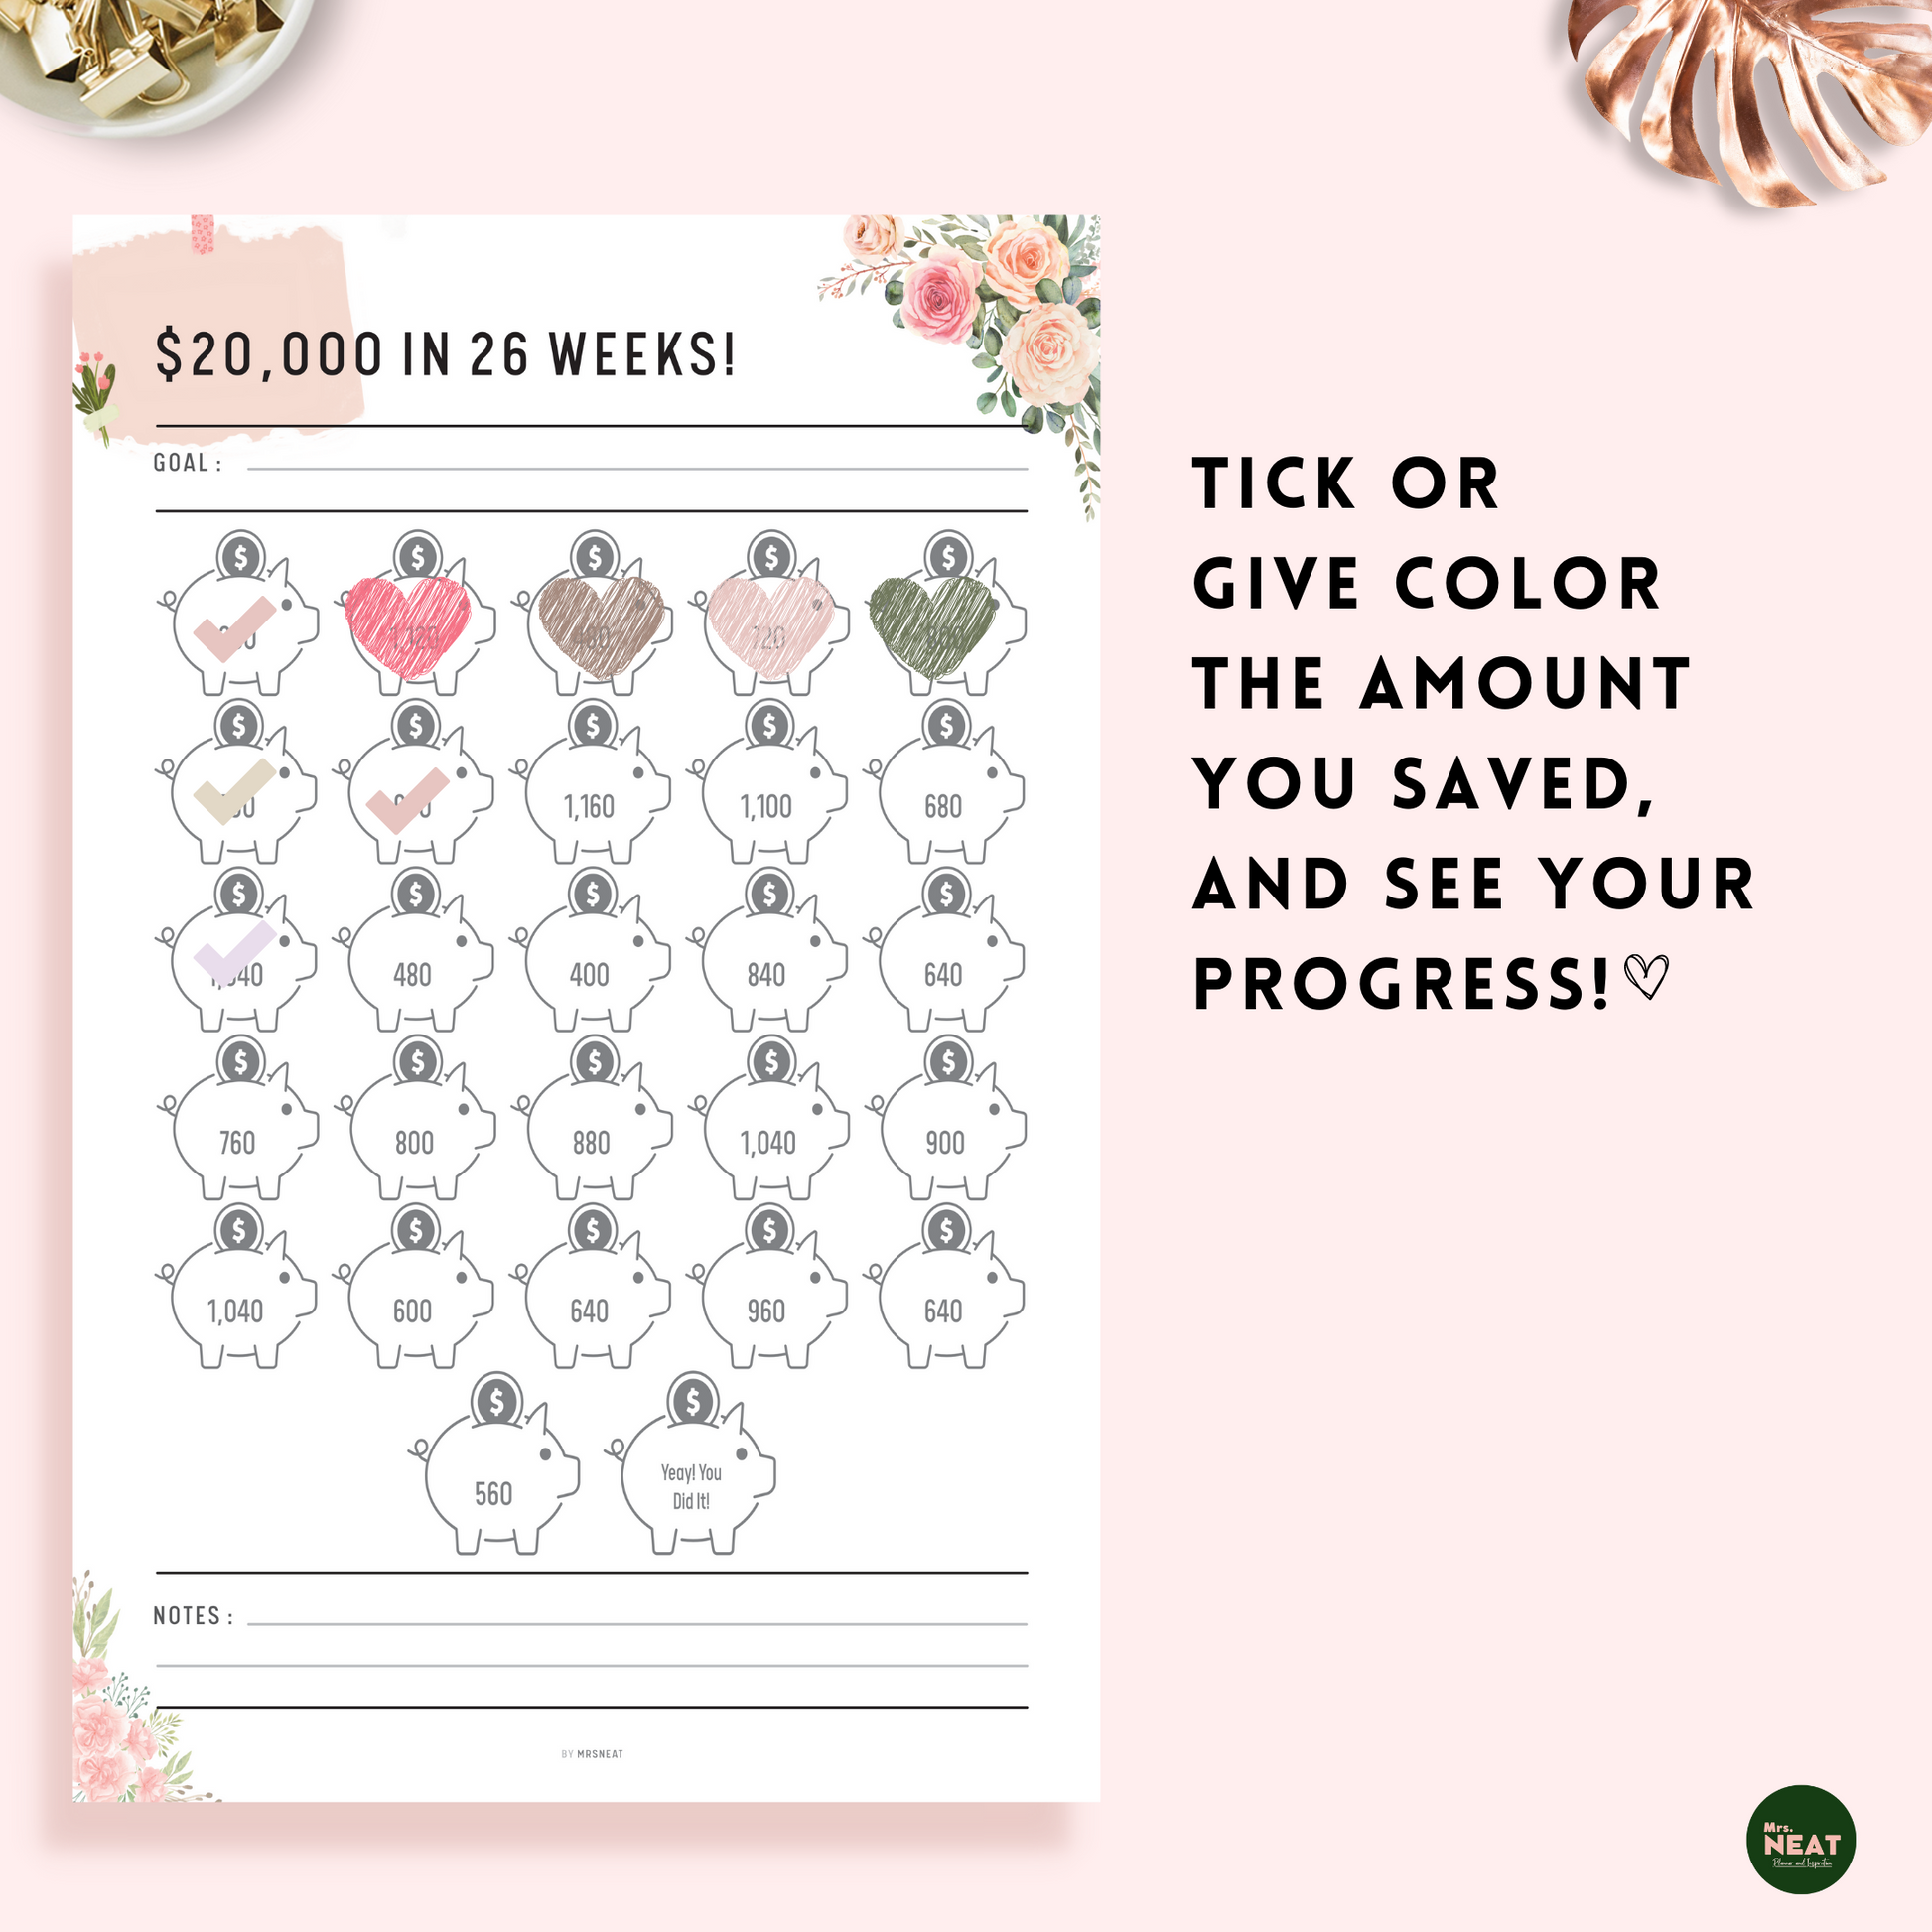 Tick up the amount you saved on this beautiful floral $20000 saving challenge planner and see your progress